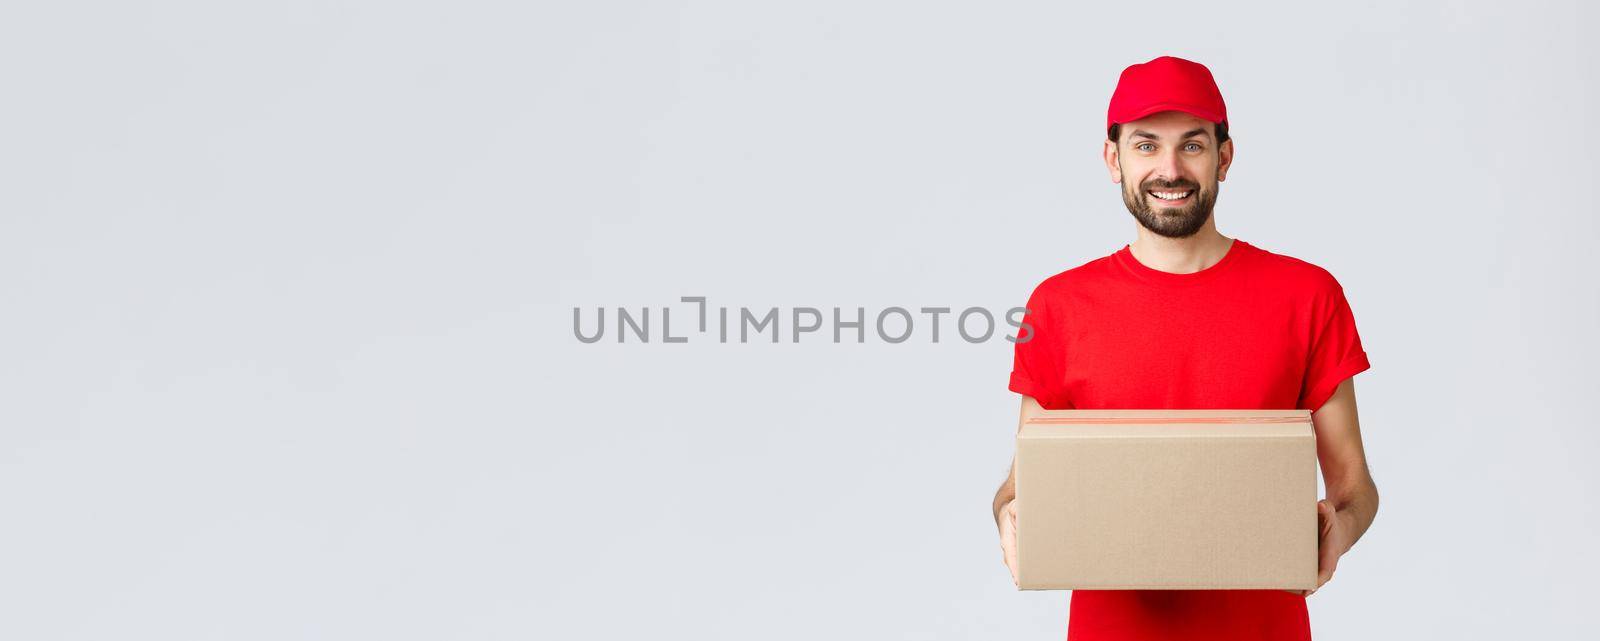 Order delivery, online shopping and package shipping concept. Smiling friendly courier bring package to client doorstep. Employee in red service cap and t-shirt holding box, parcel for customer.